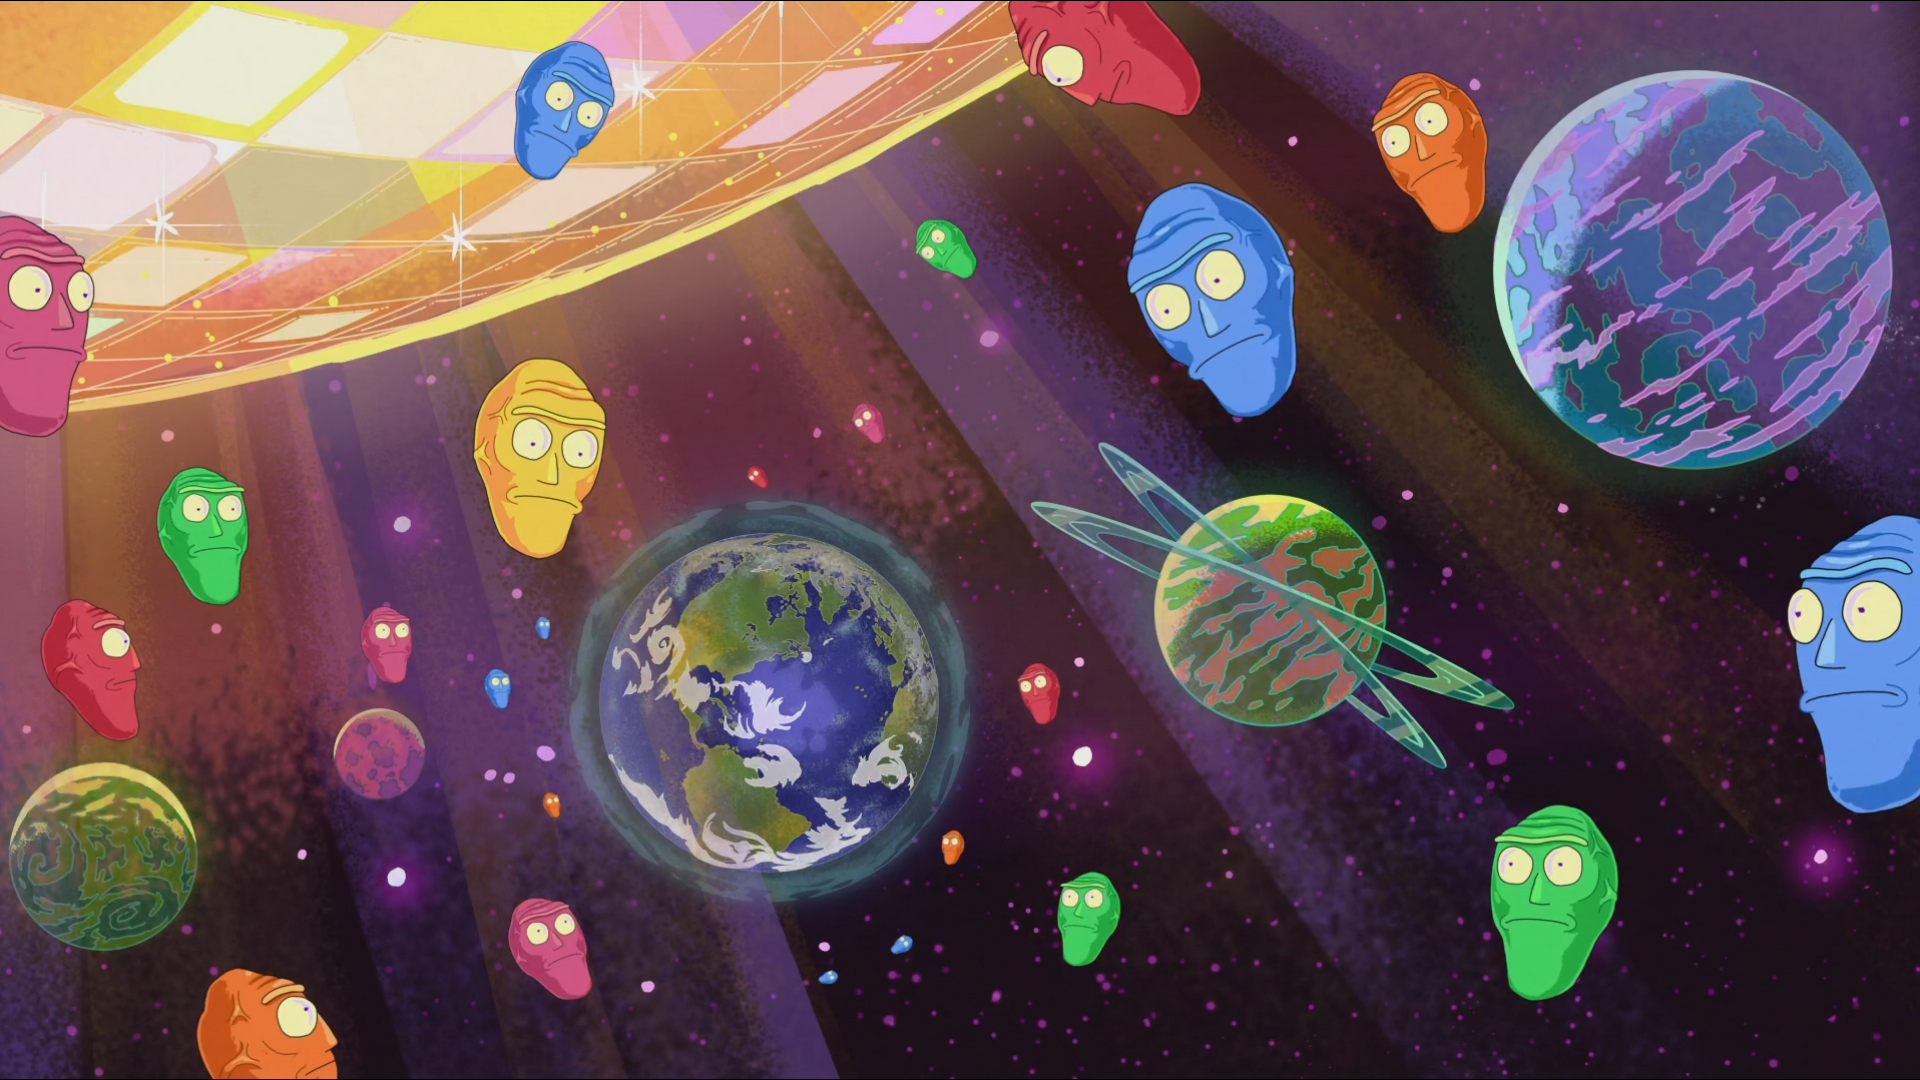 General 1920x1080 Rick and Morty space cartoon colorful